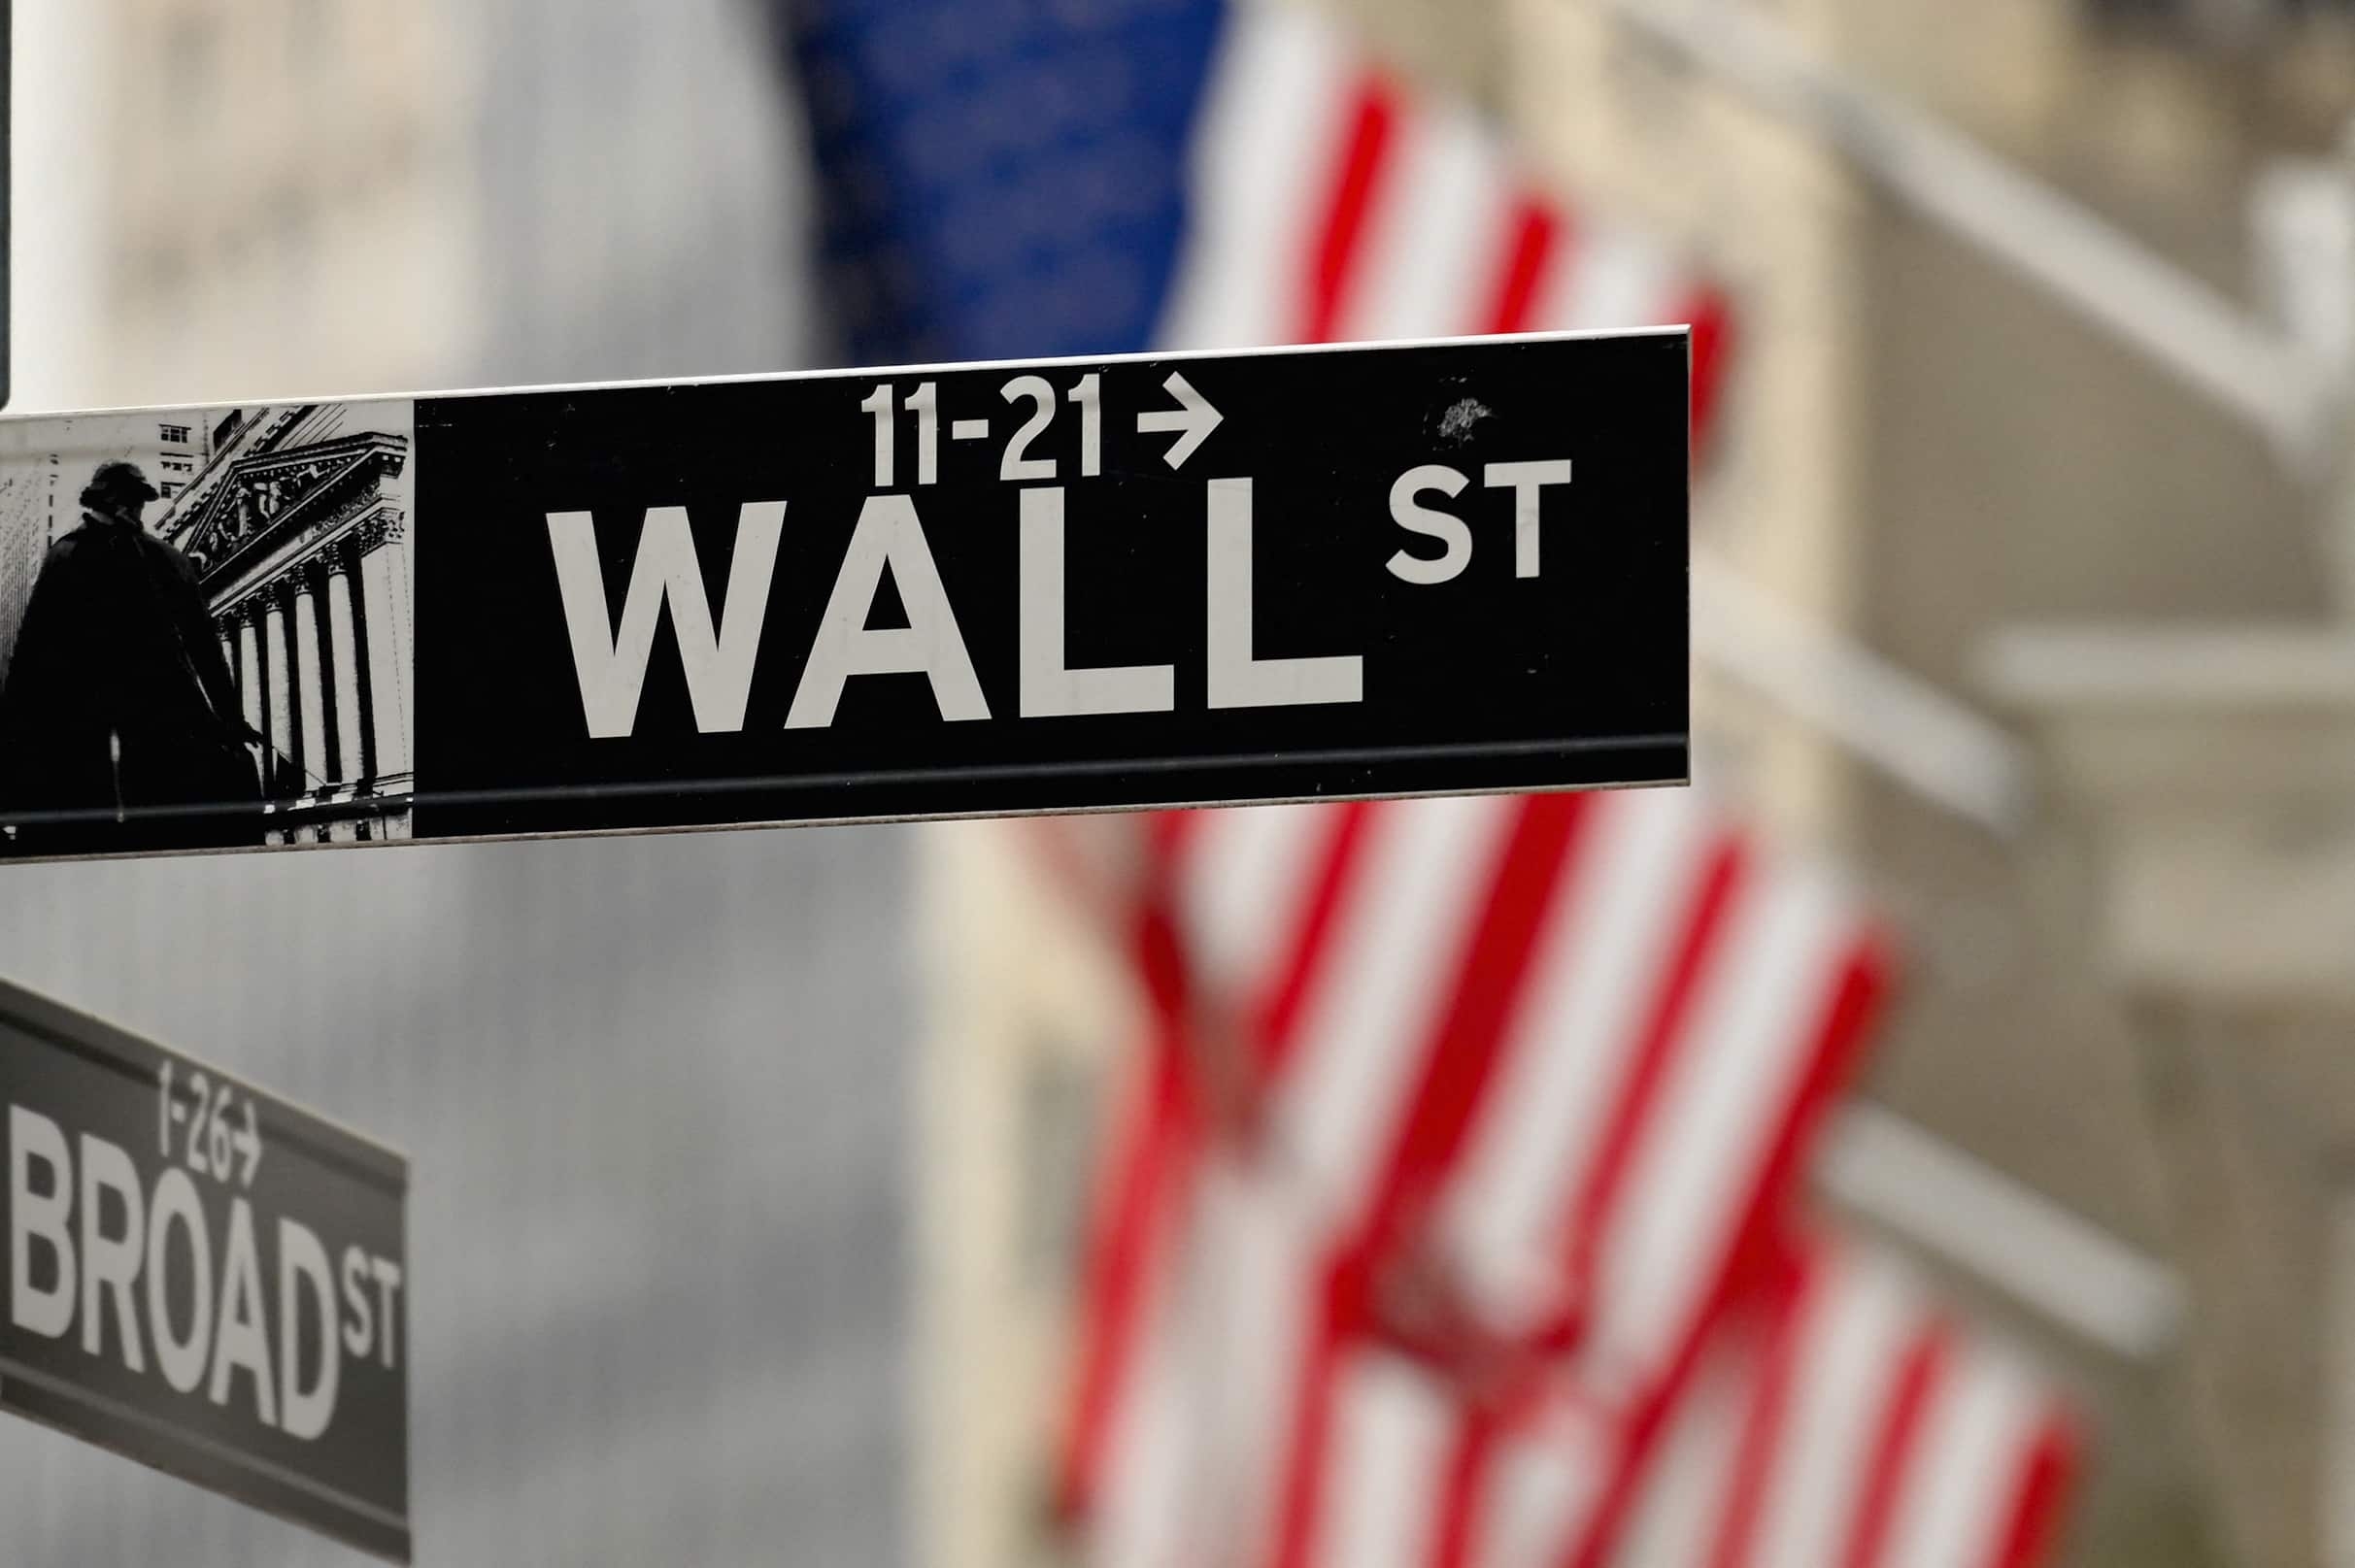 Wall Street ended sharply lower on Tuesday, with financial stocks bearing much of the damage for a second straight day as the Russia-Ukraine crisis deepened and stirred anxiety among investors. Ten of the 11 S&amp;P 500 sector indexes fell, led by financials, down 3.7 percent. The Dow Jones Industrial Average fell 1.76 percent to end at 33,294.95 points, while the S&amp;P 500 lost 1.55 percent to 4,306.24. The Nasdaq Composite dropped 1.59 percent to 13,532.46.